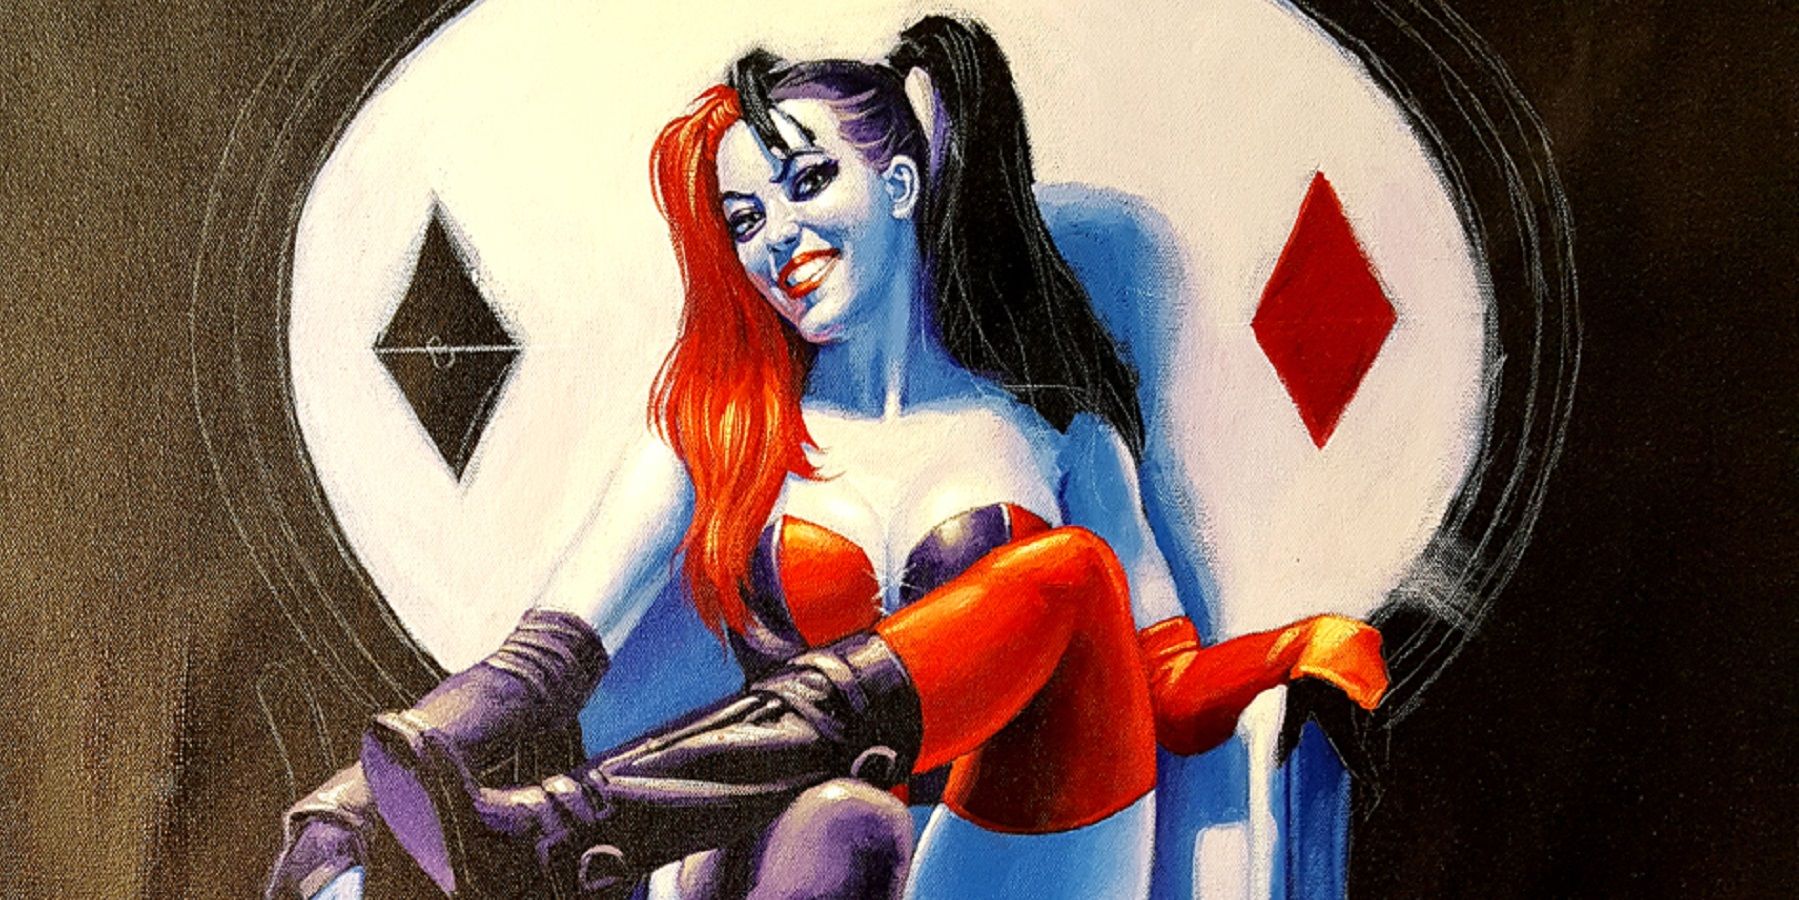 Greg Hildebrandt to Paint Harley Quinn at Live Demonstration in NYC